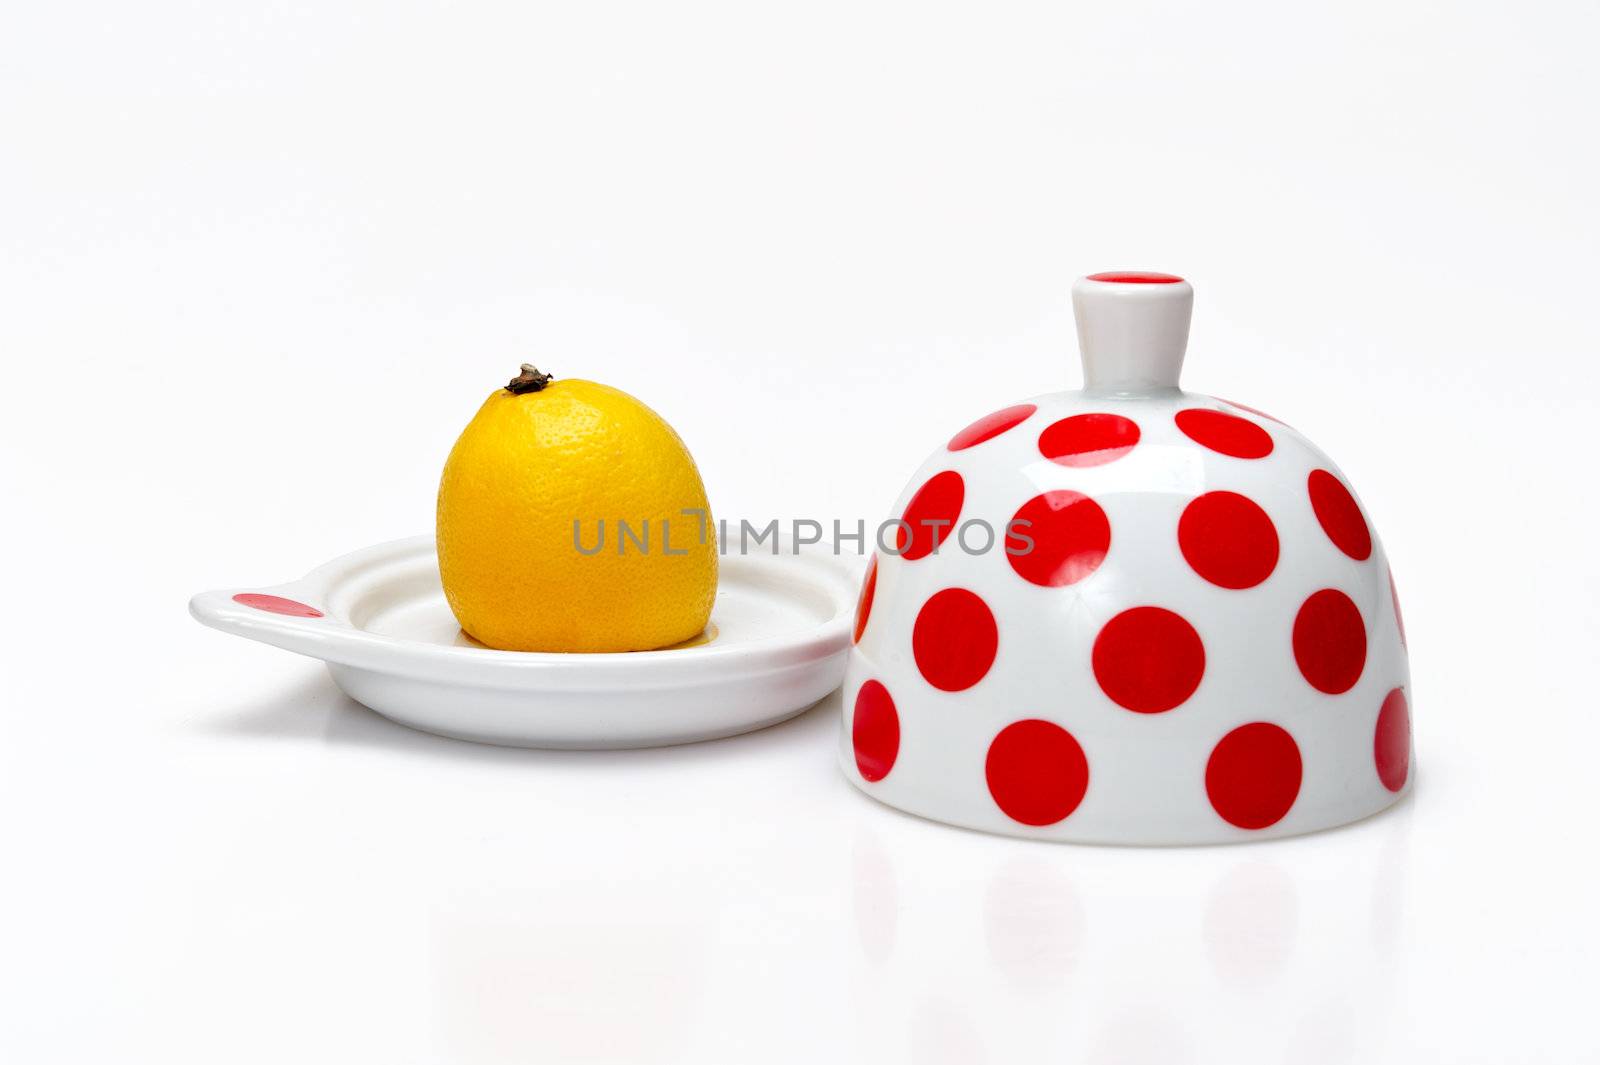 Half of lemon in a open bank on a white background